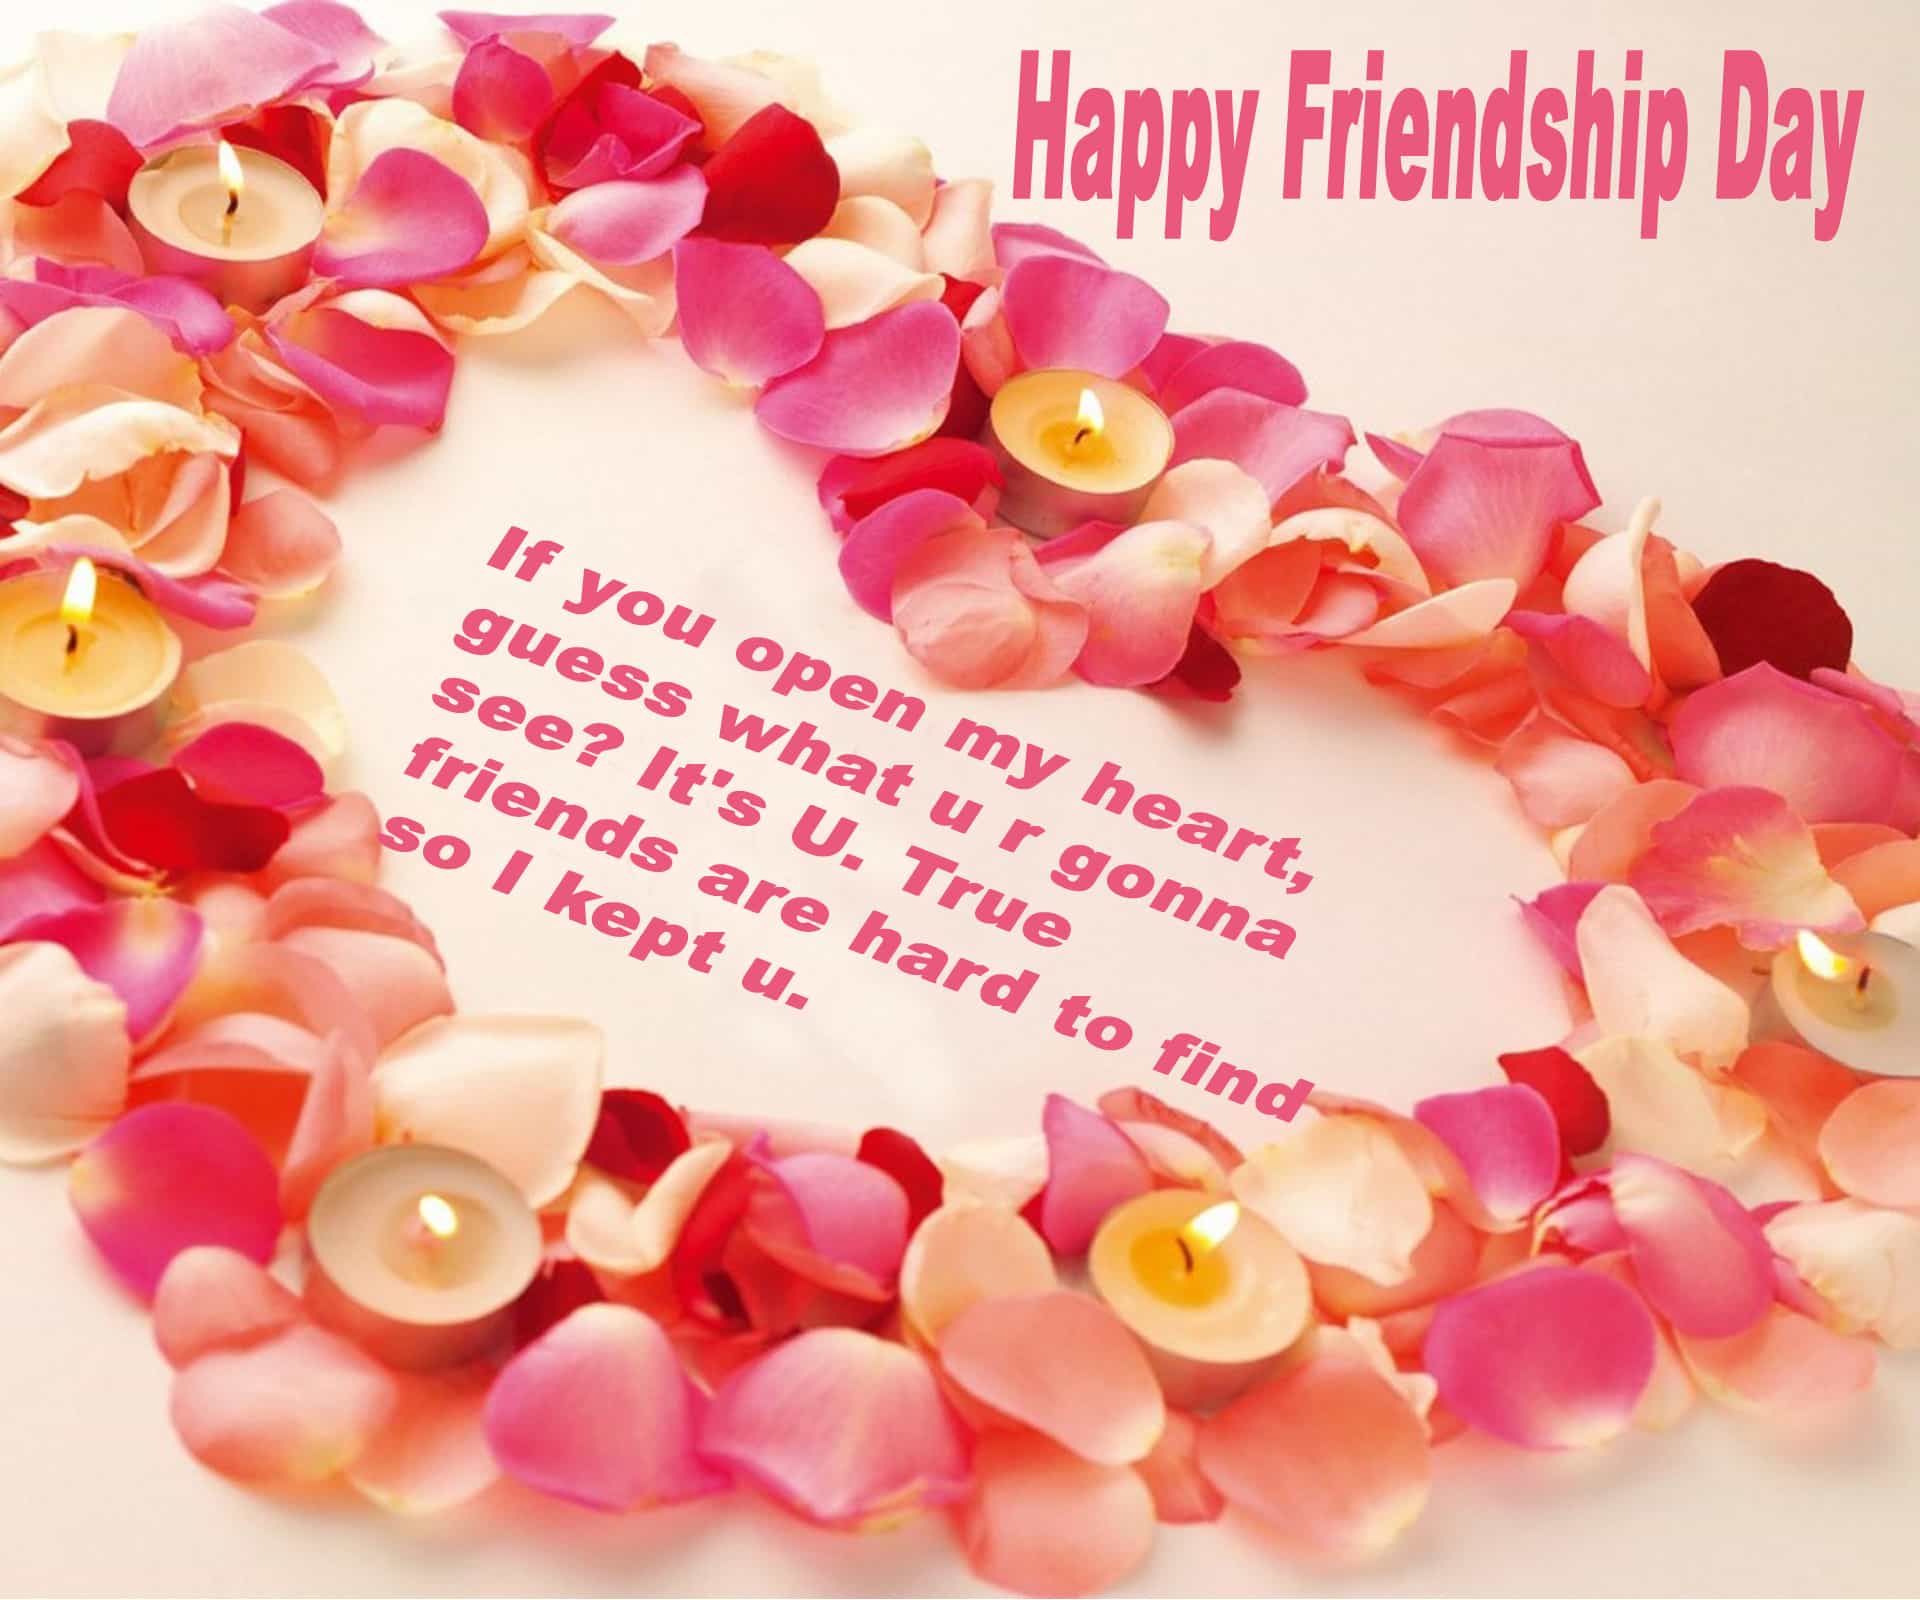 Happy Friendship Day Wallpapers For Whatsapp 2017 - Happy Friendship Day Pick , HD Wallpaper & Backgrounds